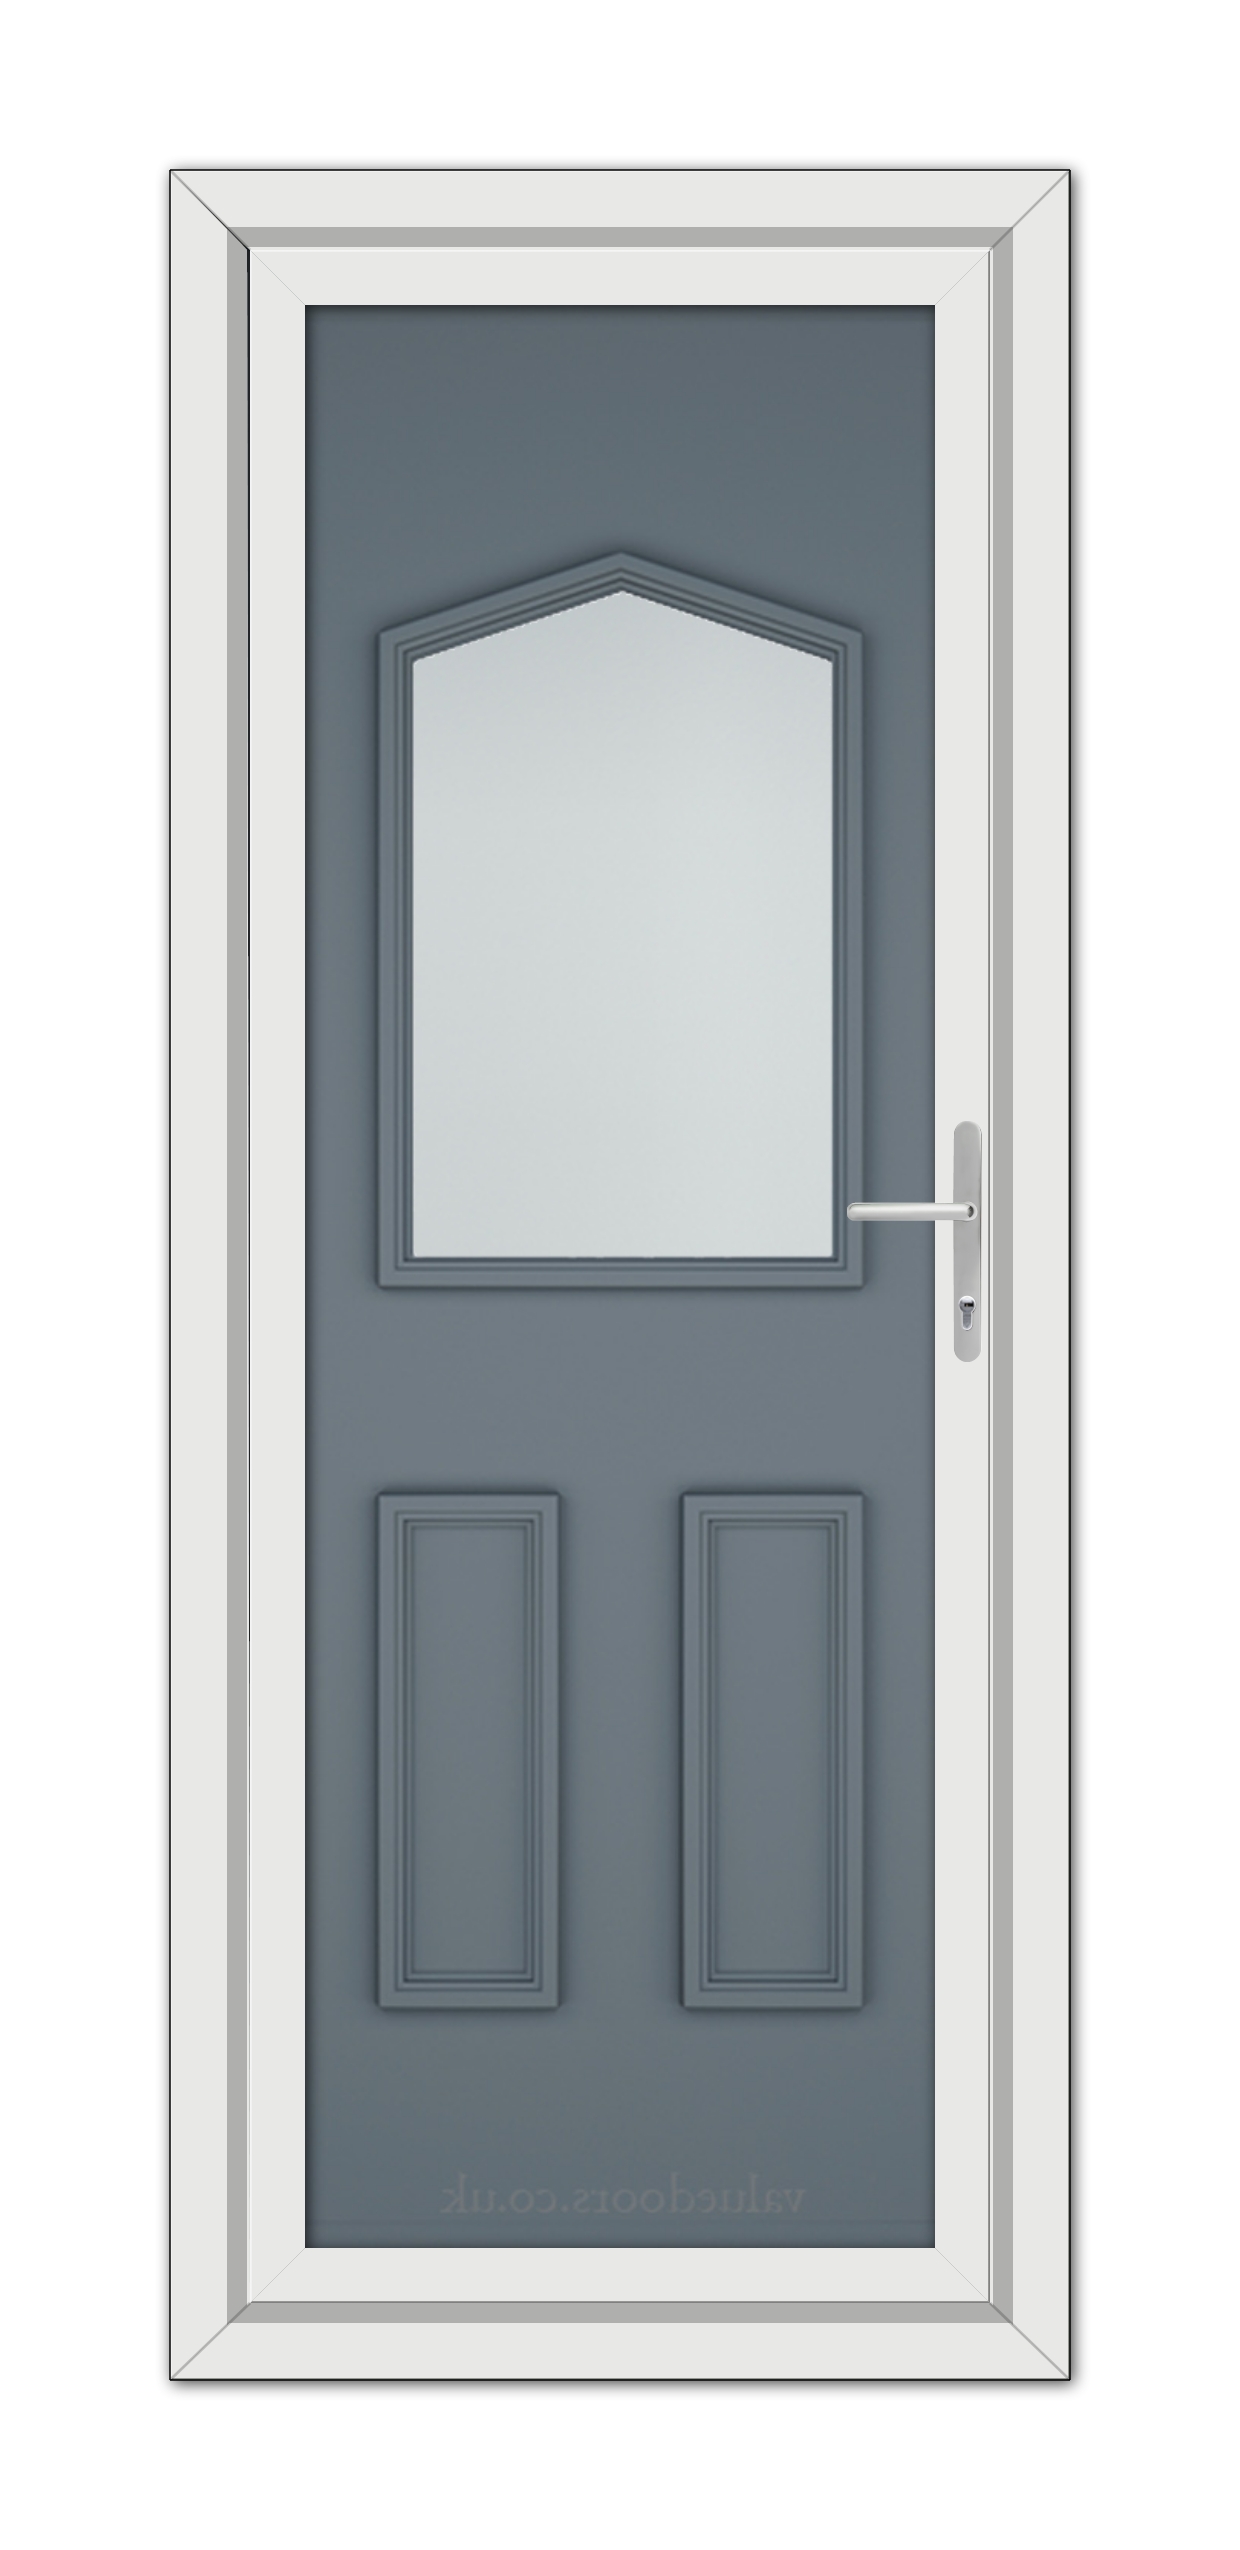 A Slate Grey Oxford uPVC Door with a glass panel.